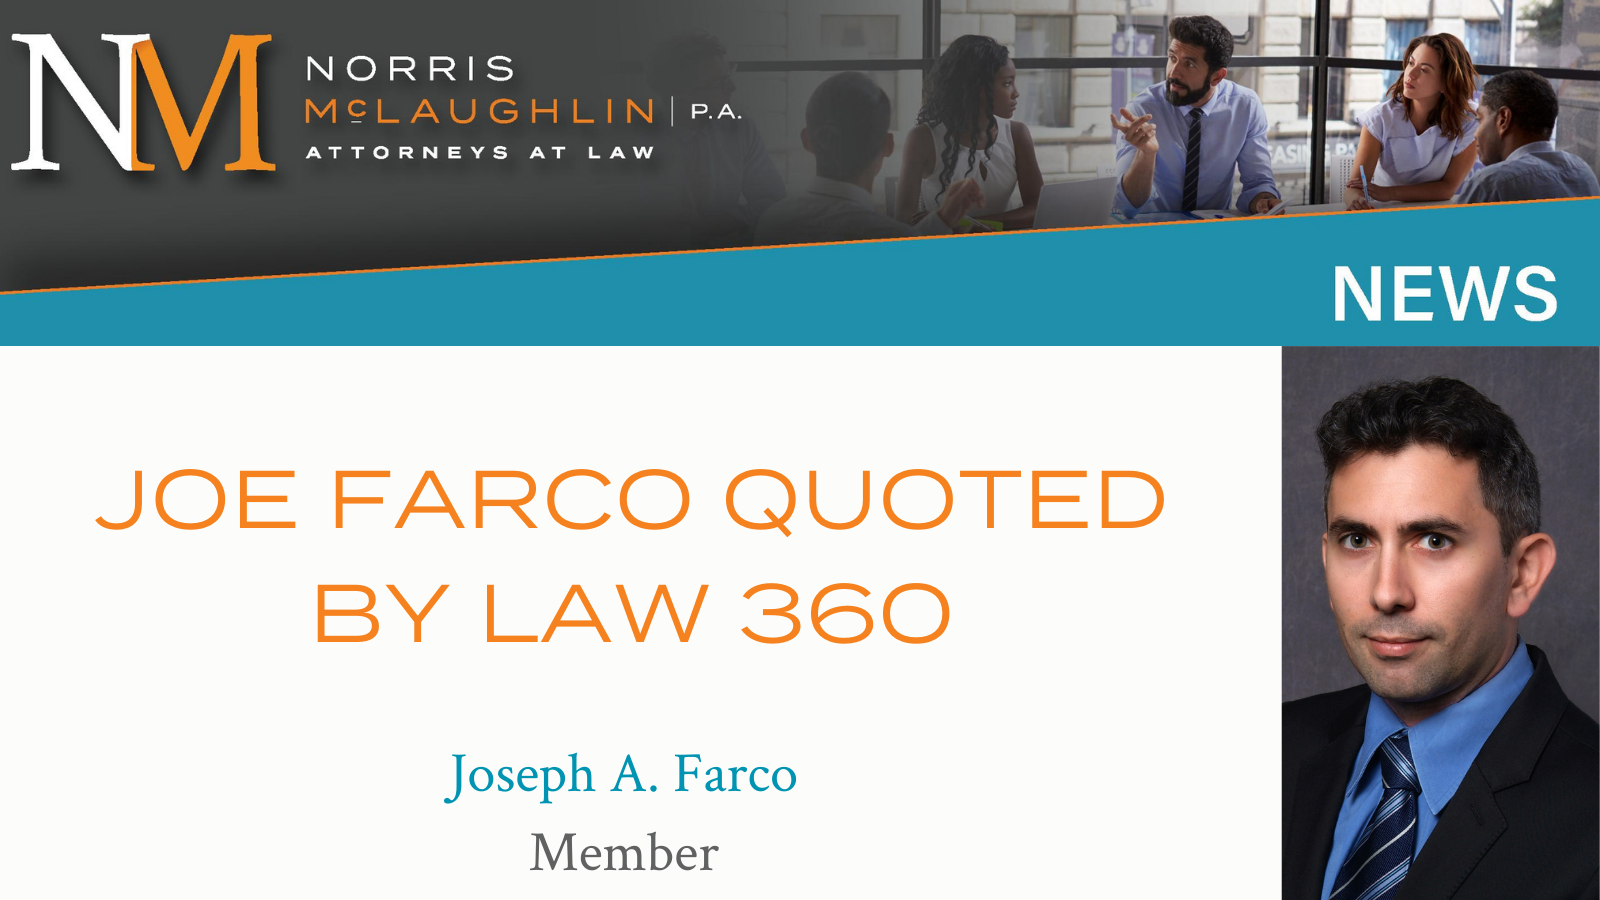 Joseph Farco Quoted by Law 360